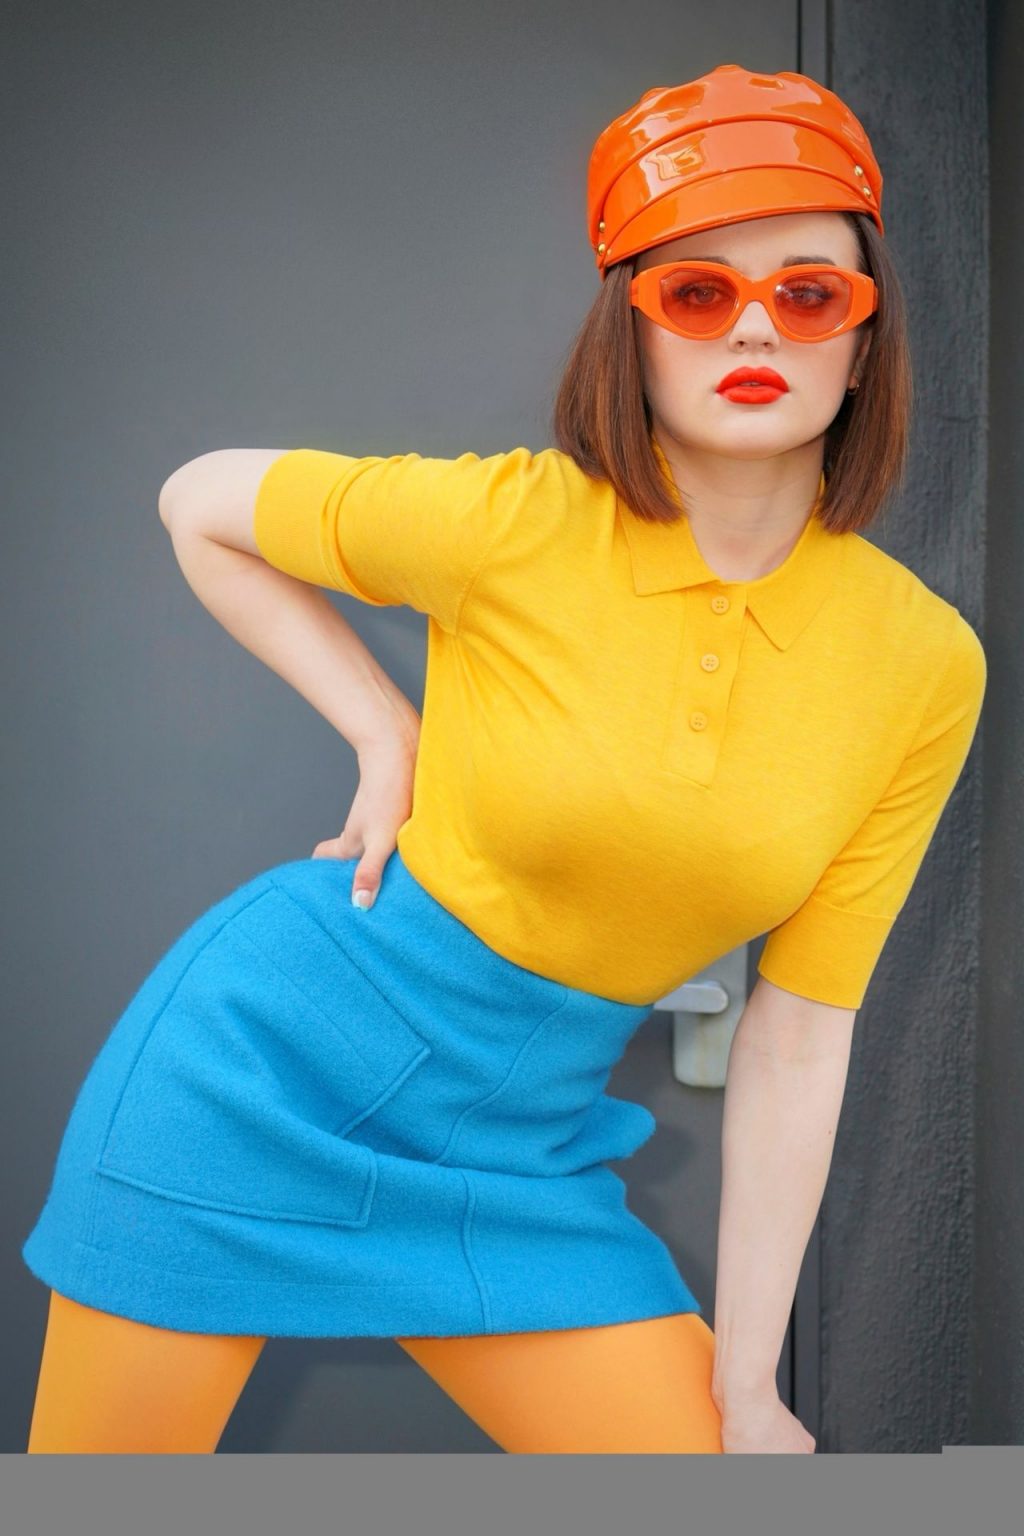 Joey King Loves Bright Colors (7 Photos)